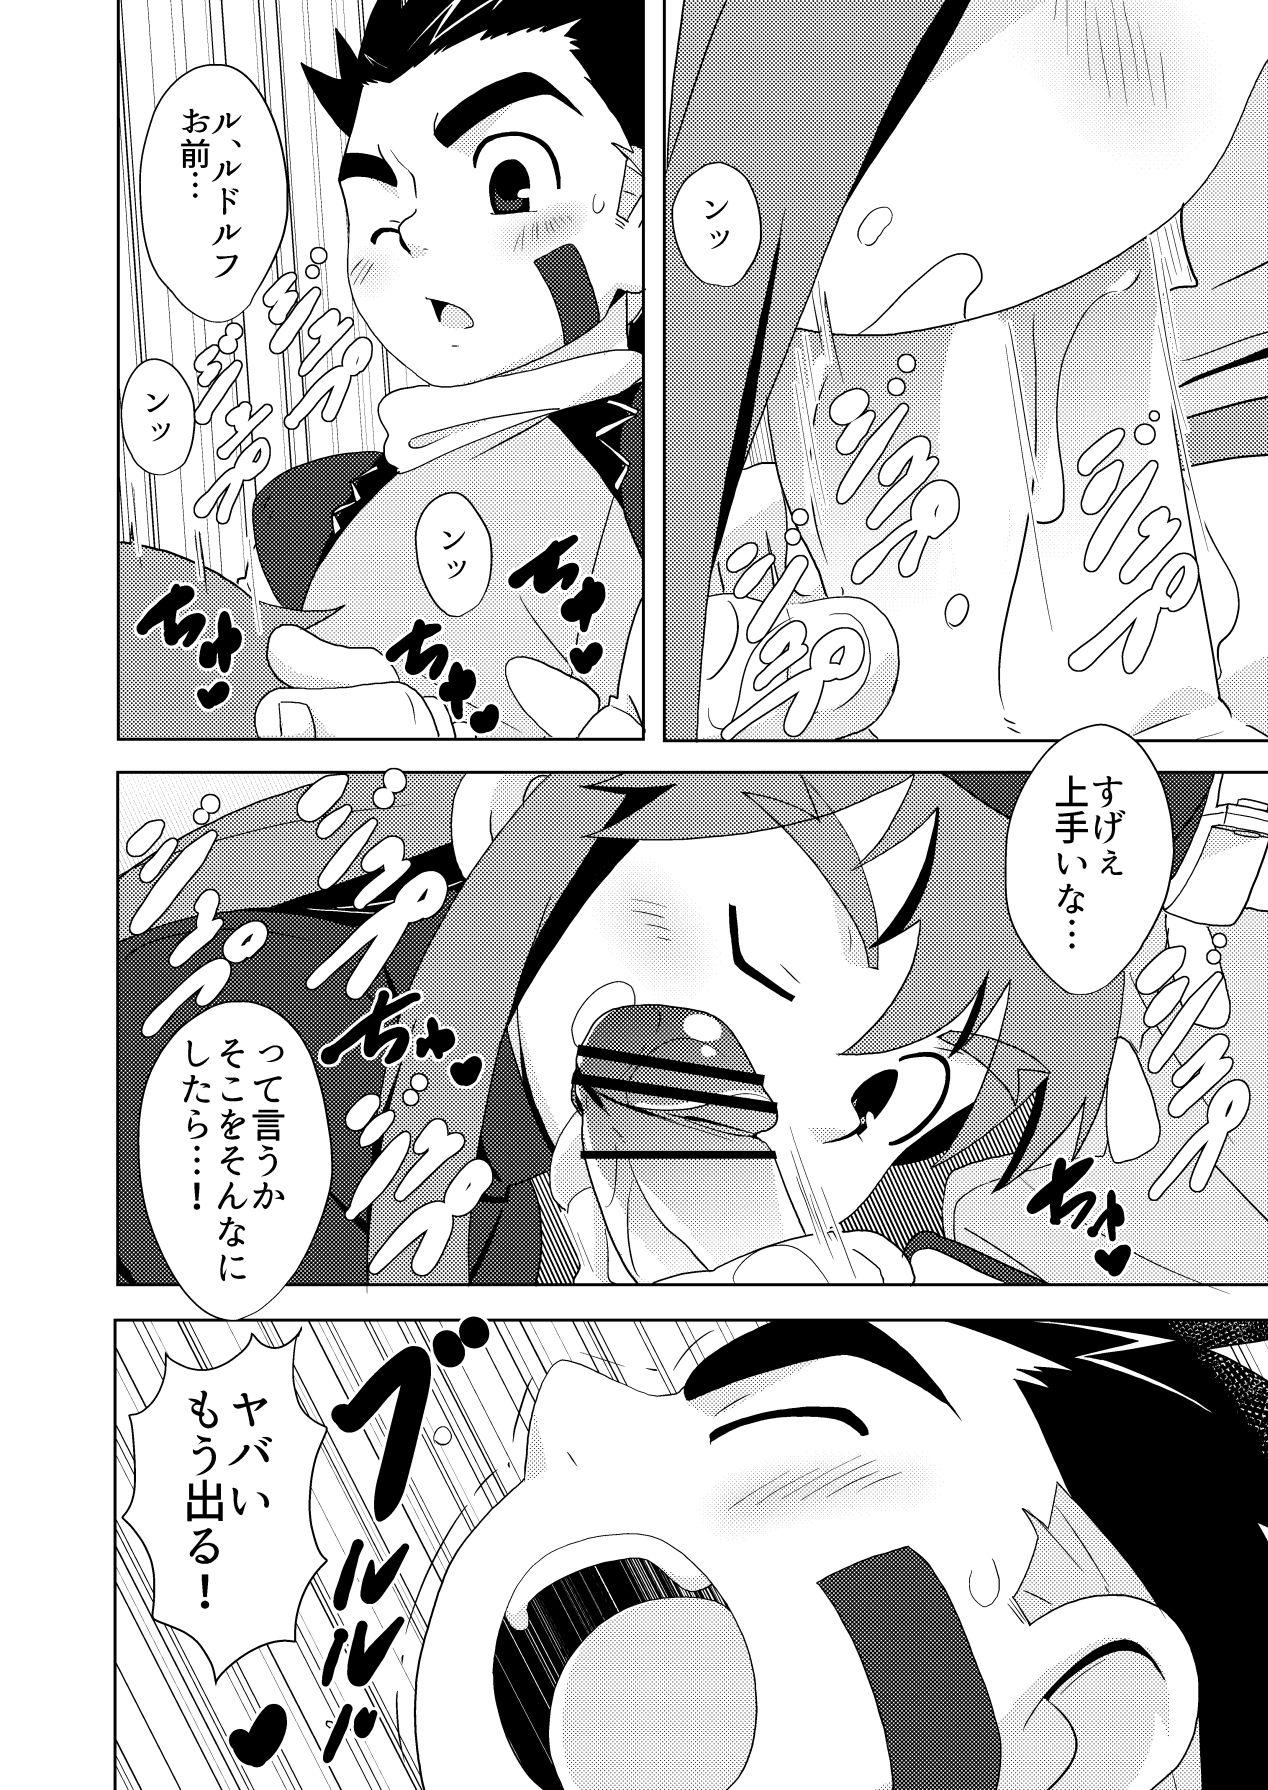 Famosa Wet Dream Land - Zoids Blowjobs - Page 12